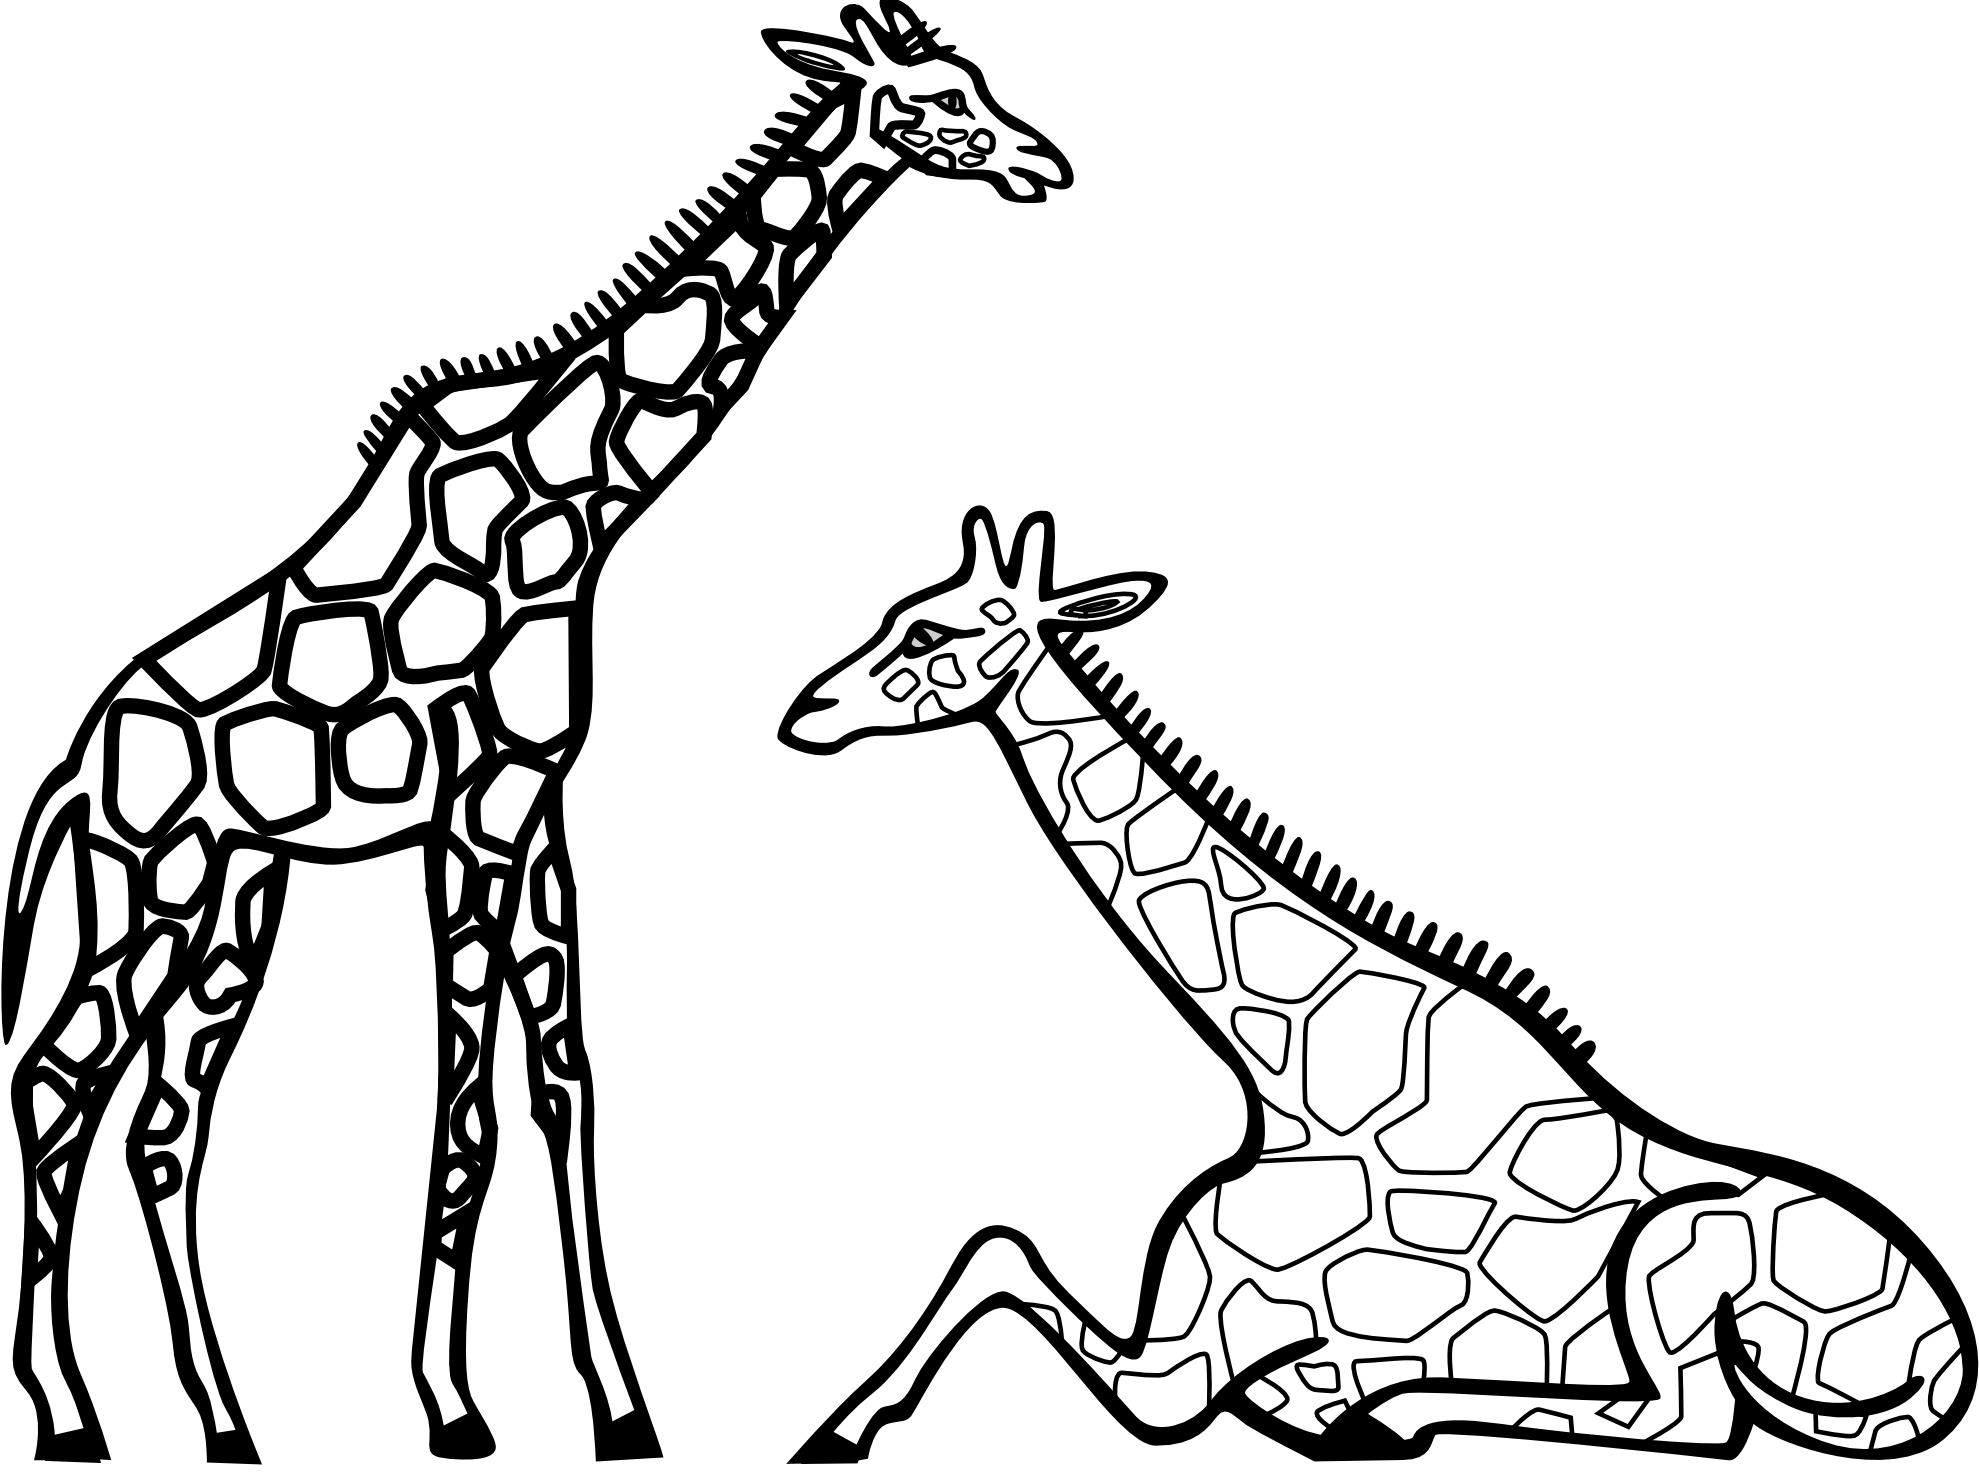 animals clipart images black and white rooms